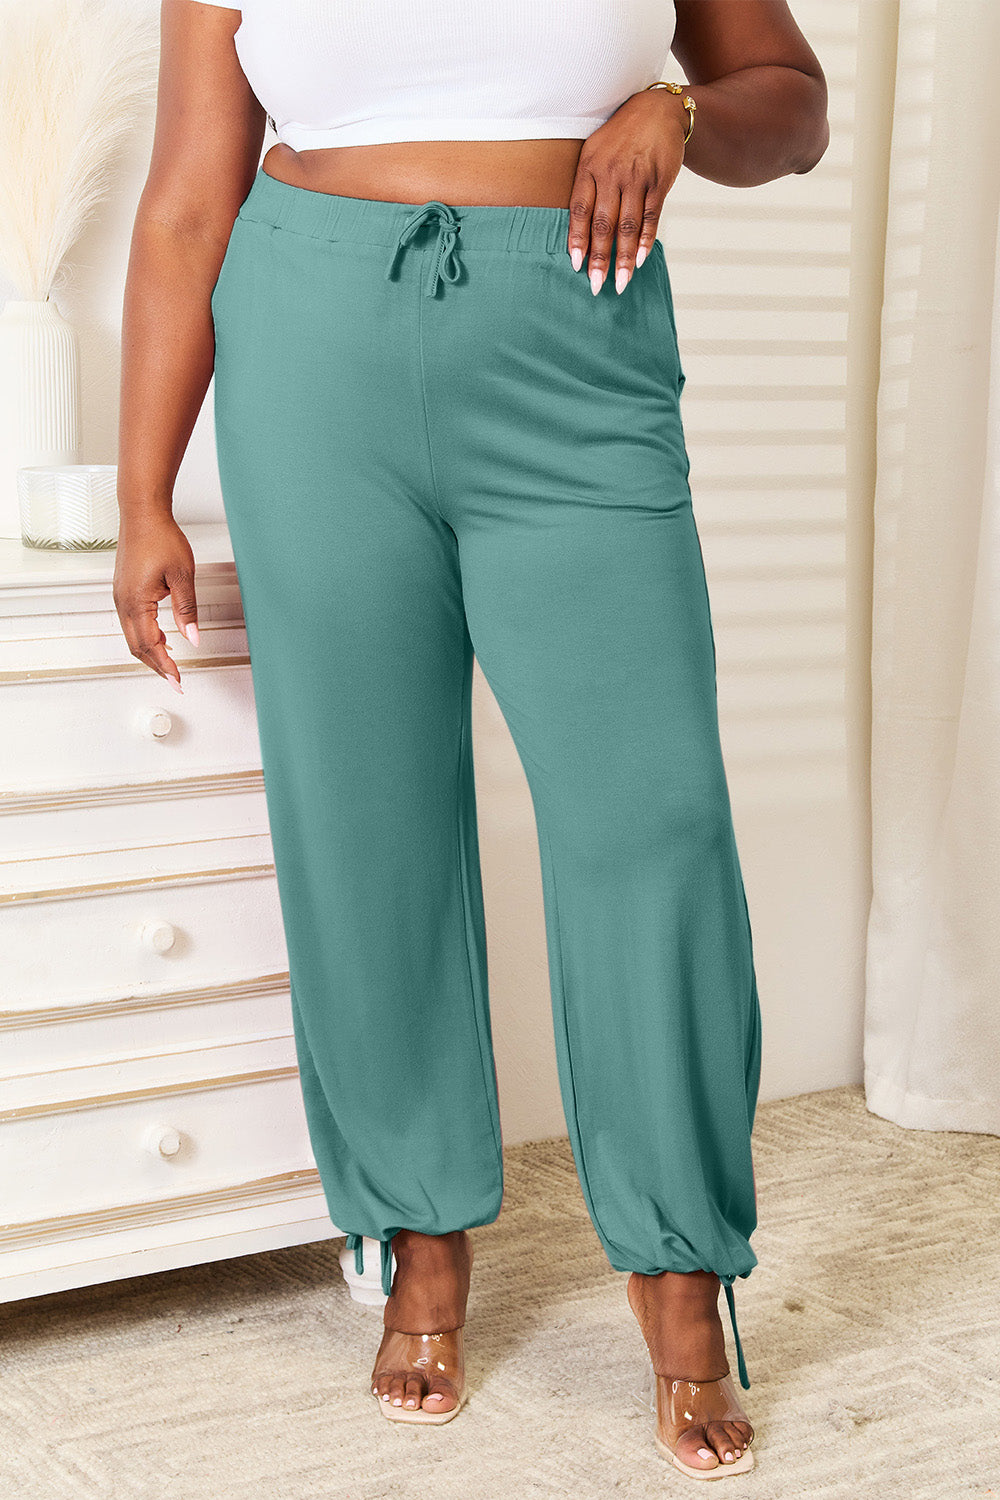 Whoopsie Daisy-Basic Bae Full Size Soft Rayon Drawstring Waist Pants with Pockets-Whoopsie Daisy